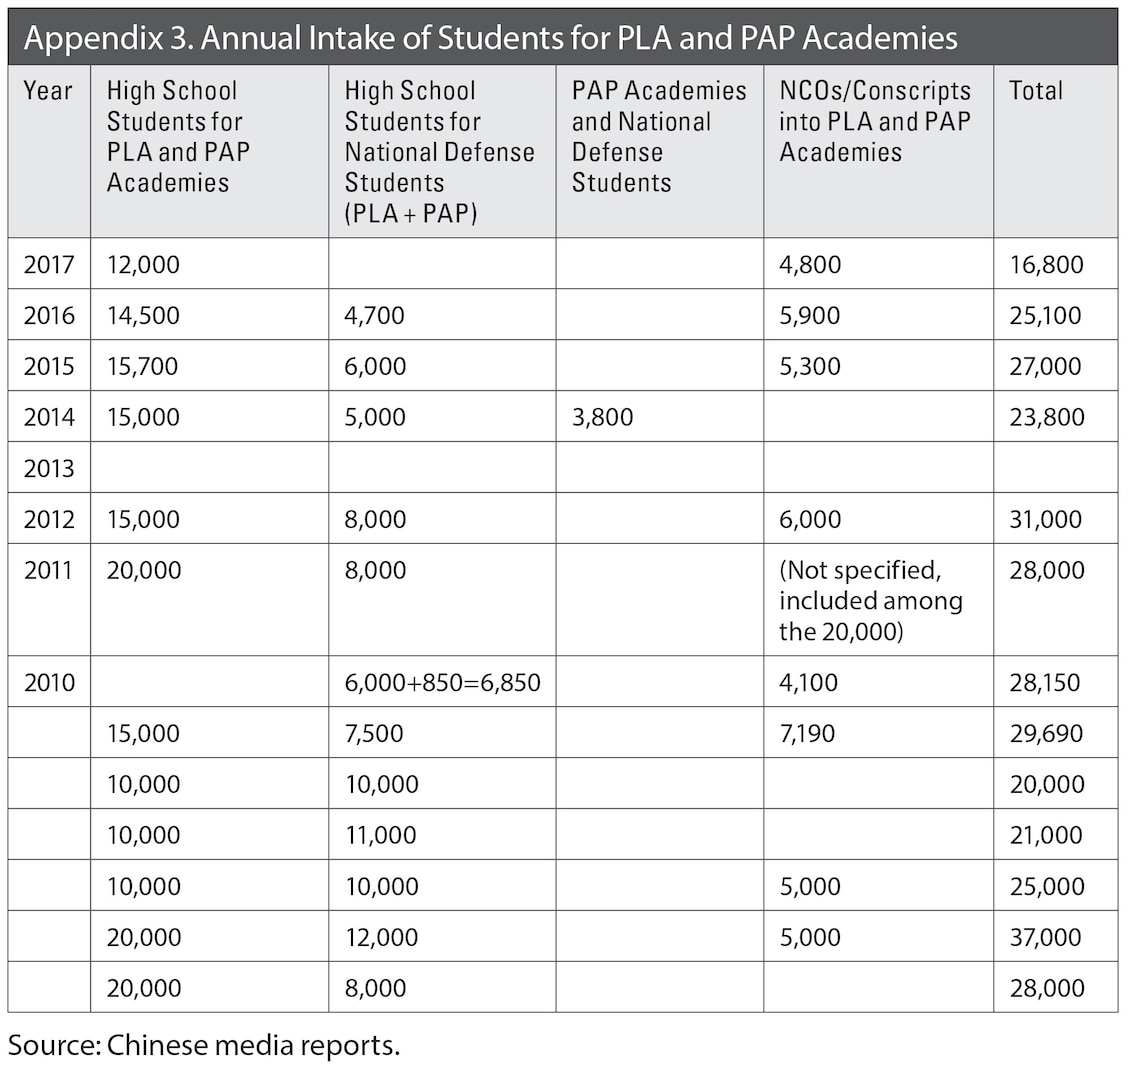 Appendix 3. Annual Intake of Students for PLA and PAP Academies